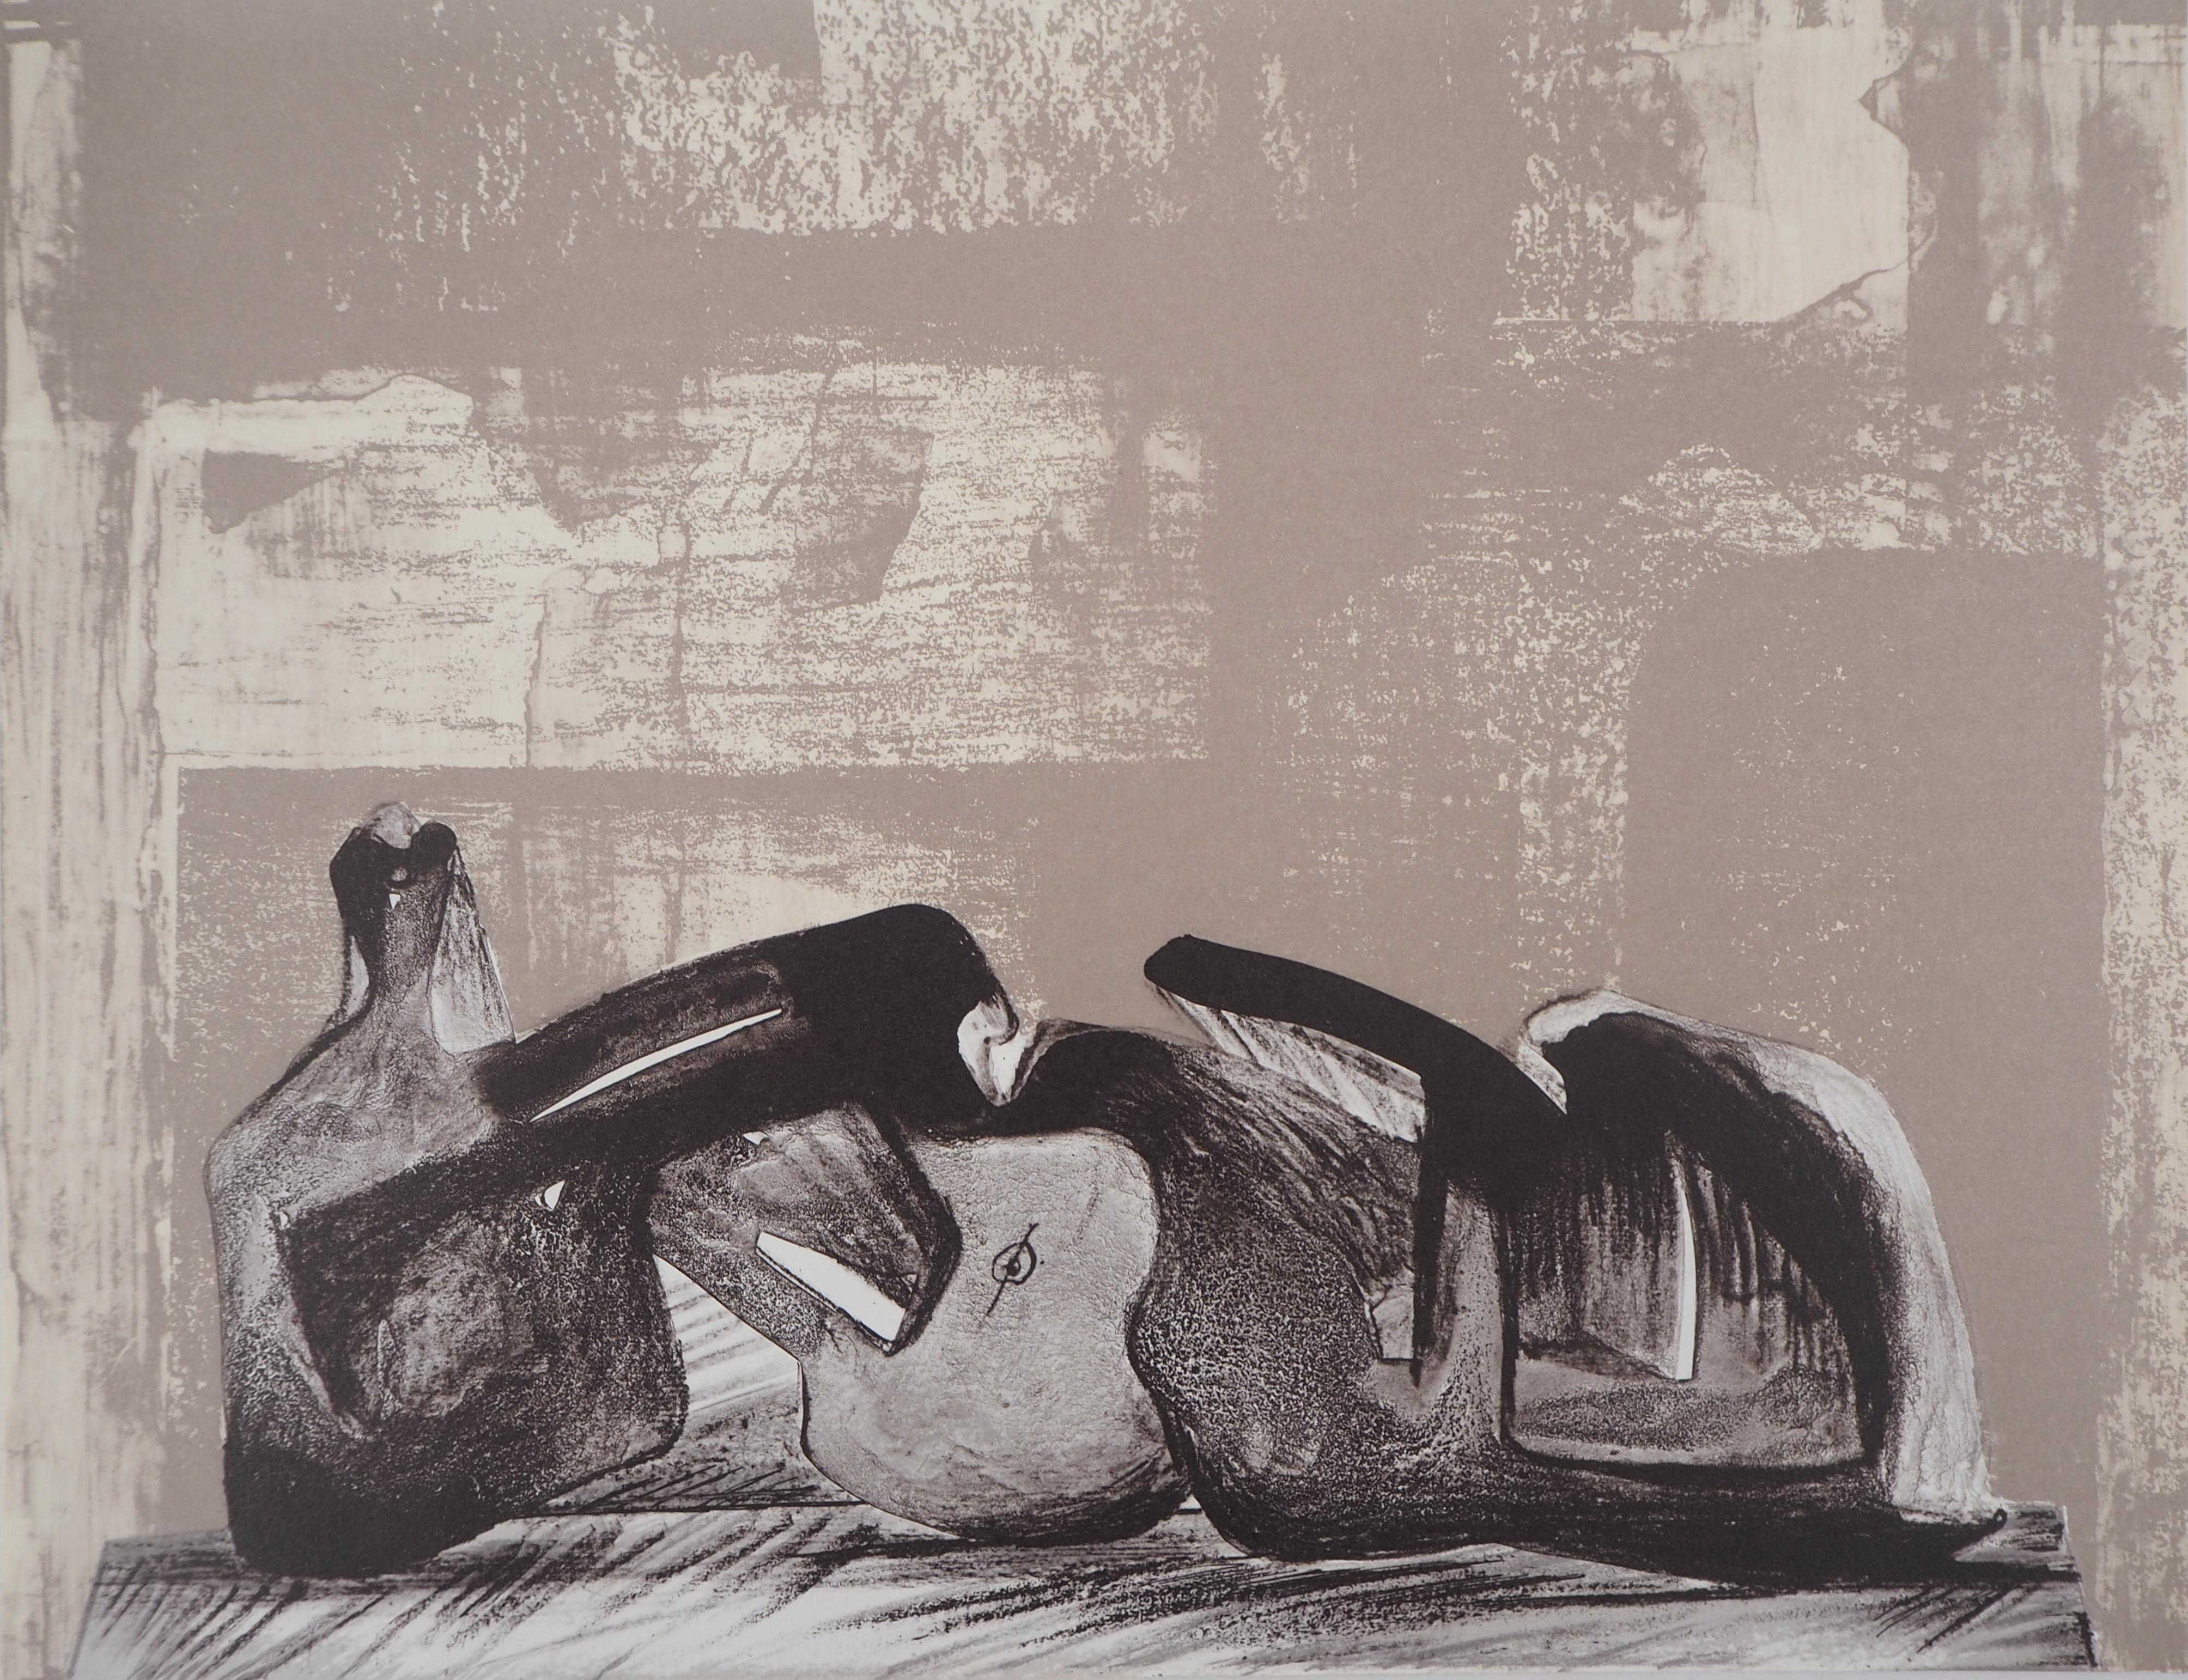 Henry Moore Nude Print - Reclining Figure - Original lithograph